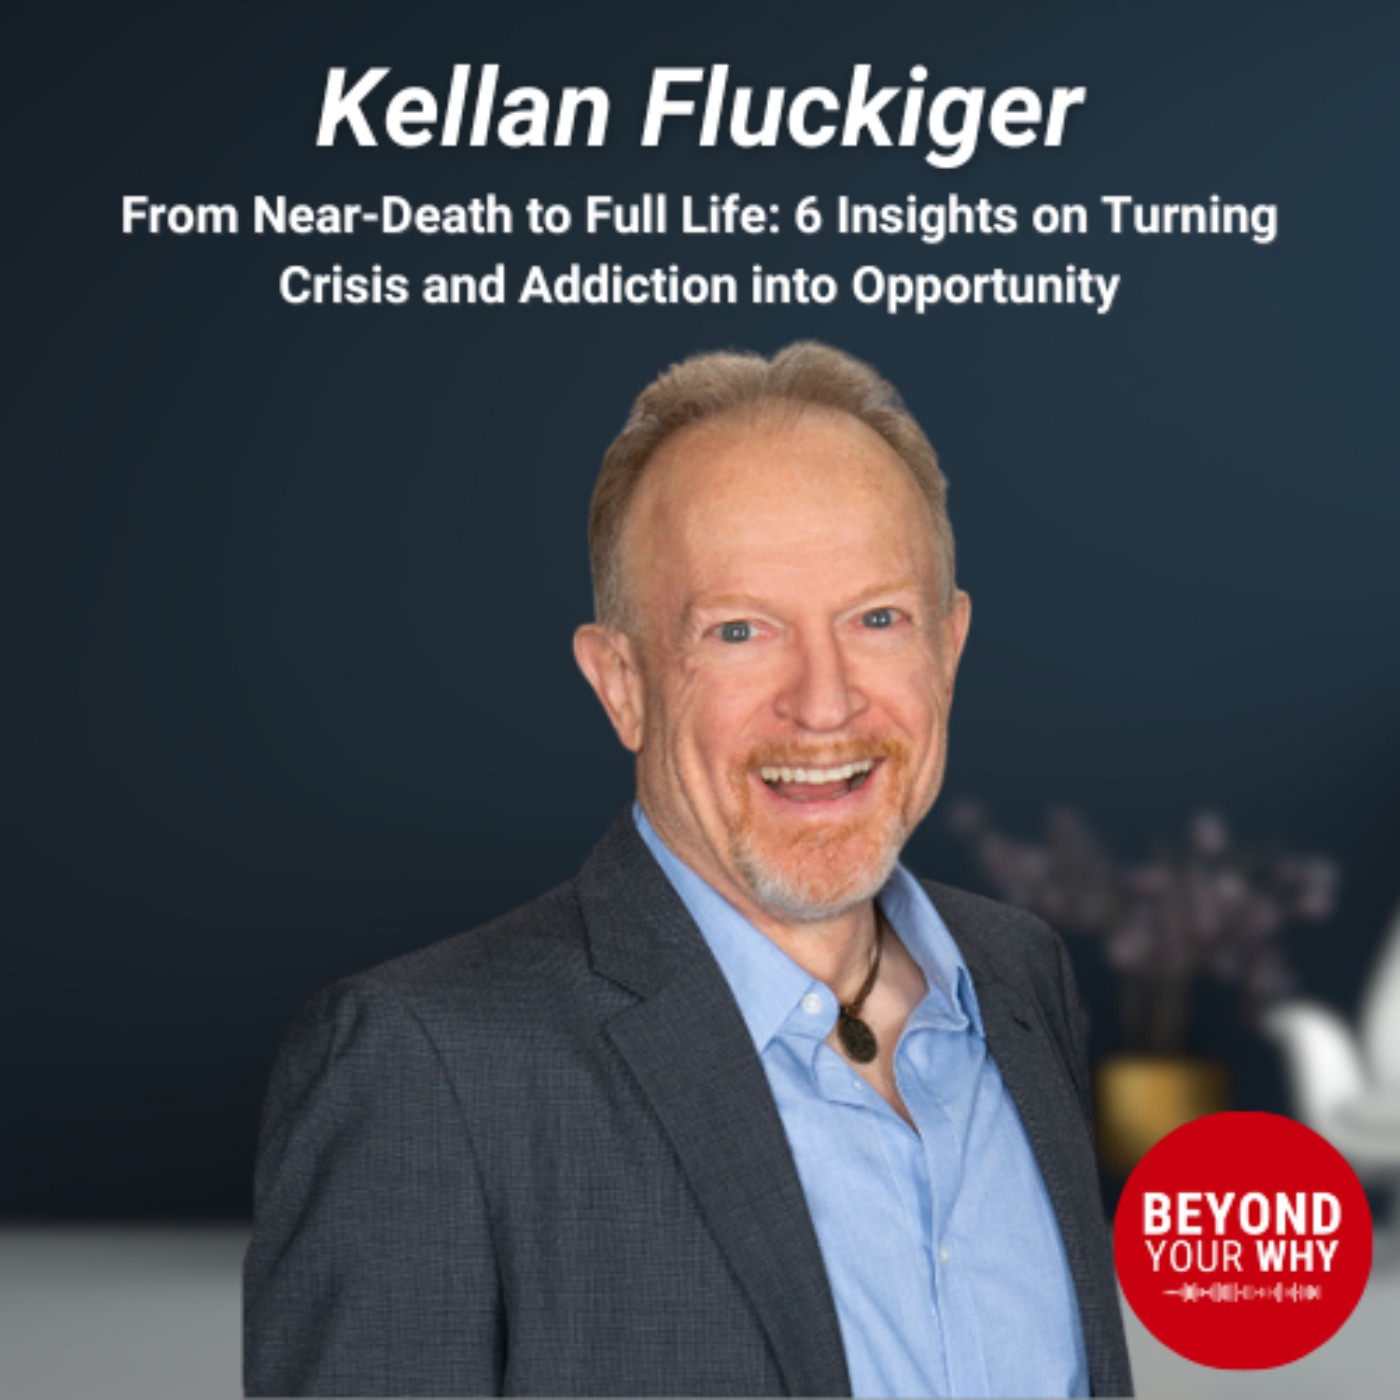 From Near-Death to Full Life: 6 Insights on Turning Crisis and Addiction into Opportunity